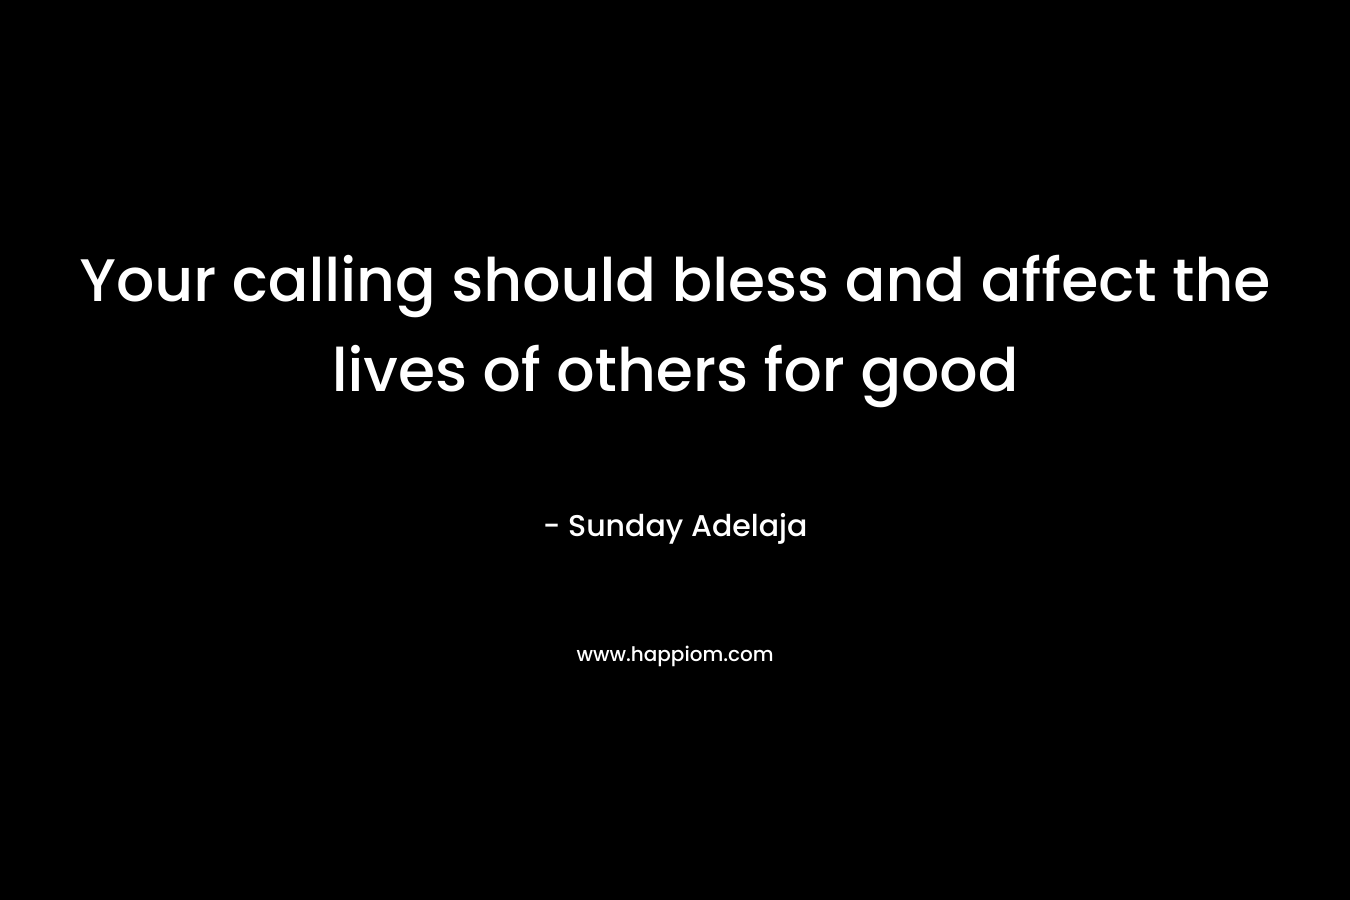 Your calling should bless and affect the lives of others for good